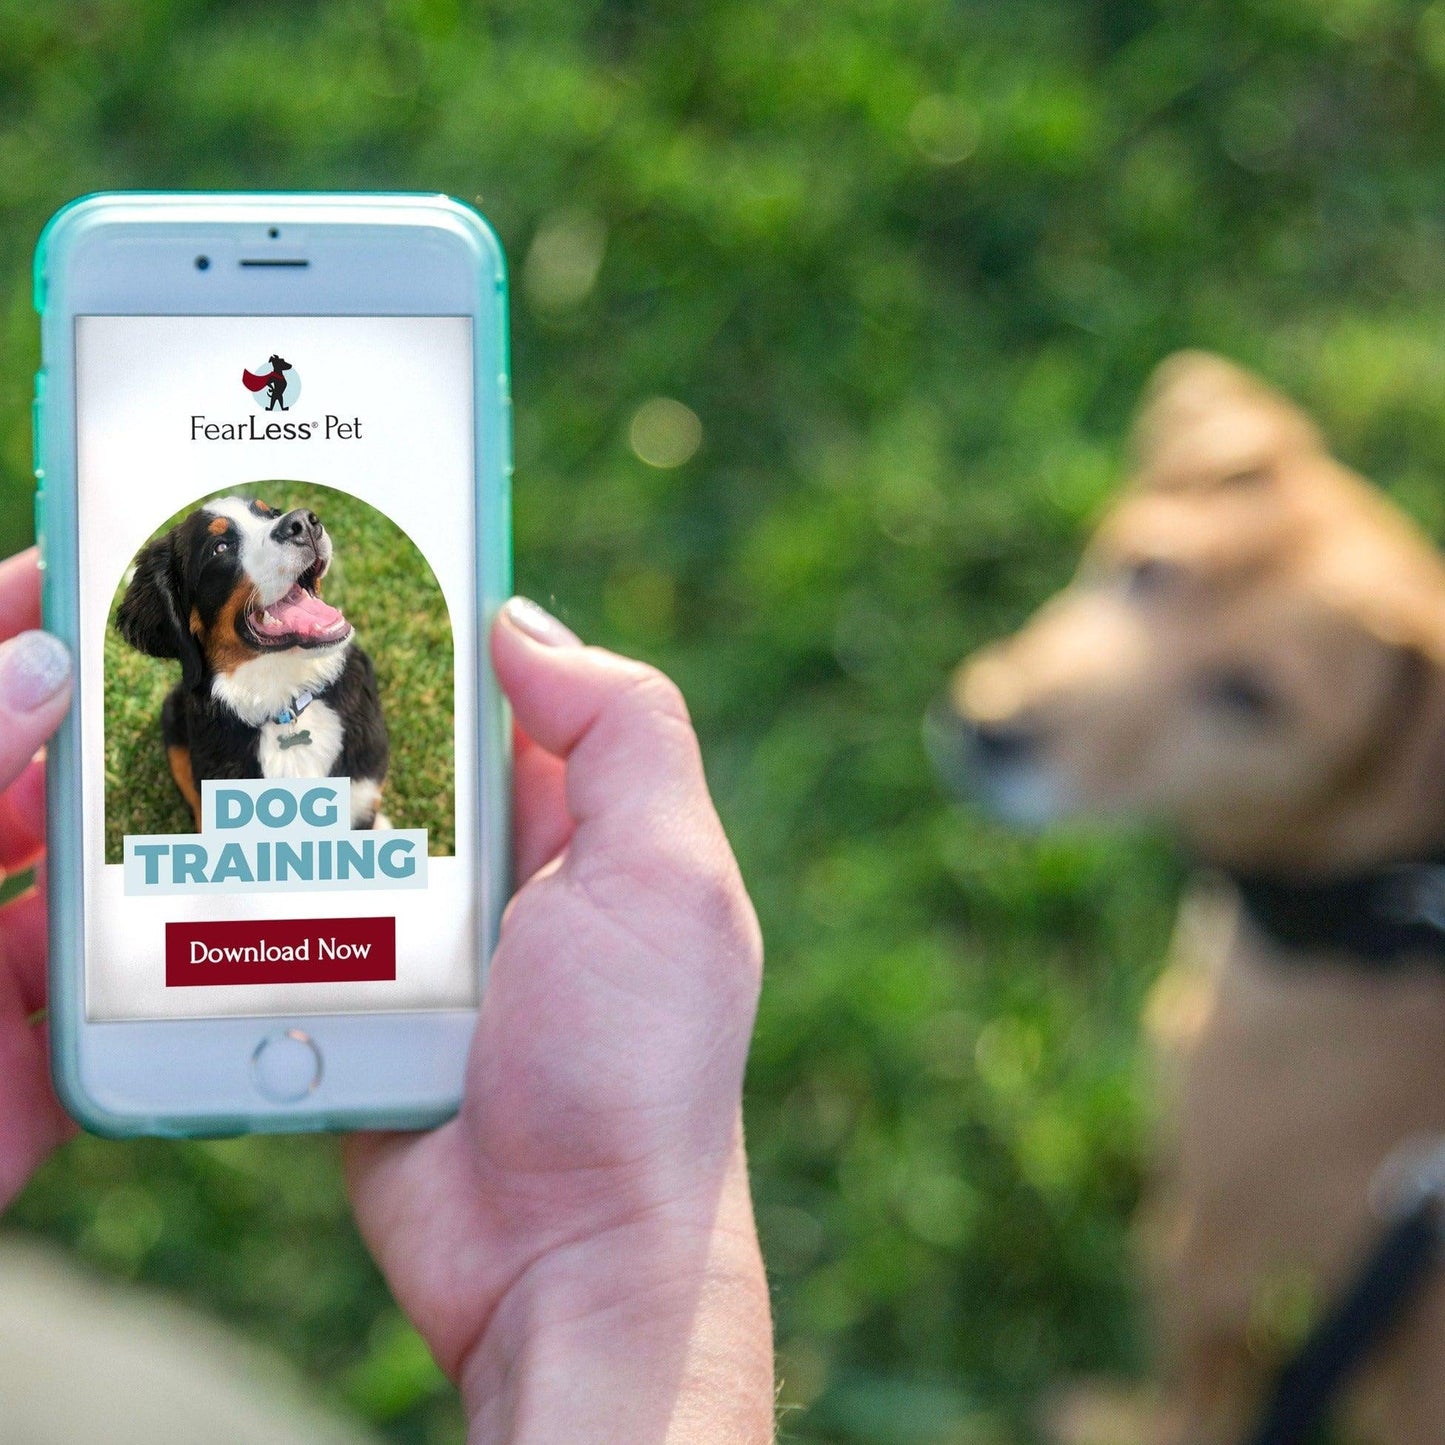 a photo of a dog training program on a phone screen shot for fearless pet dog training